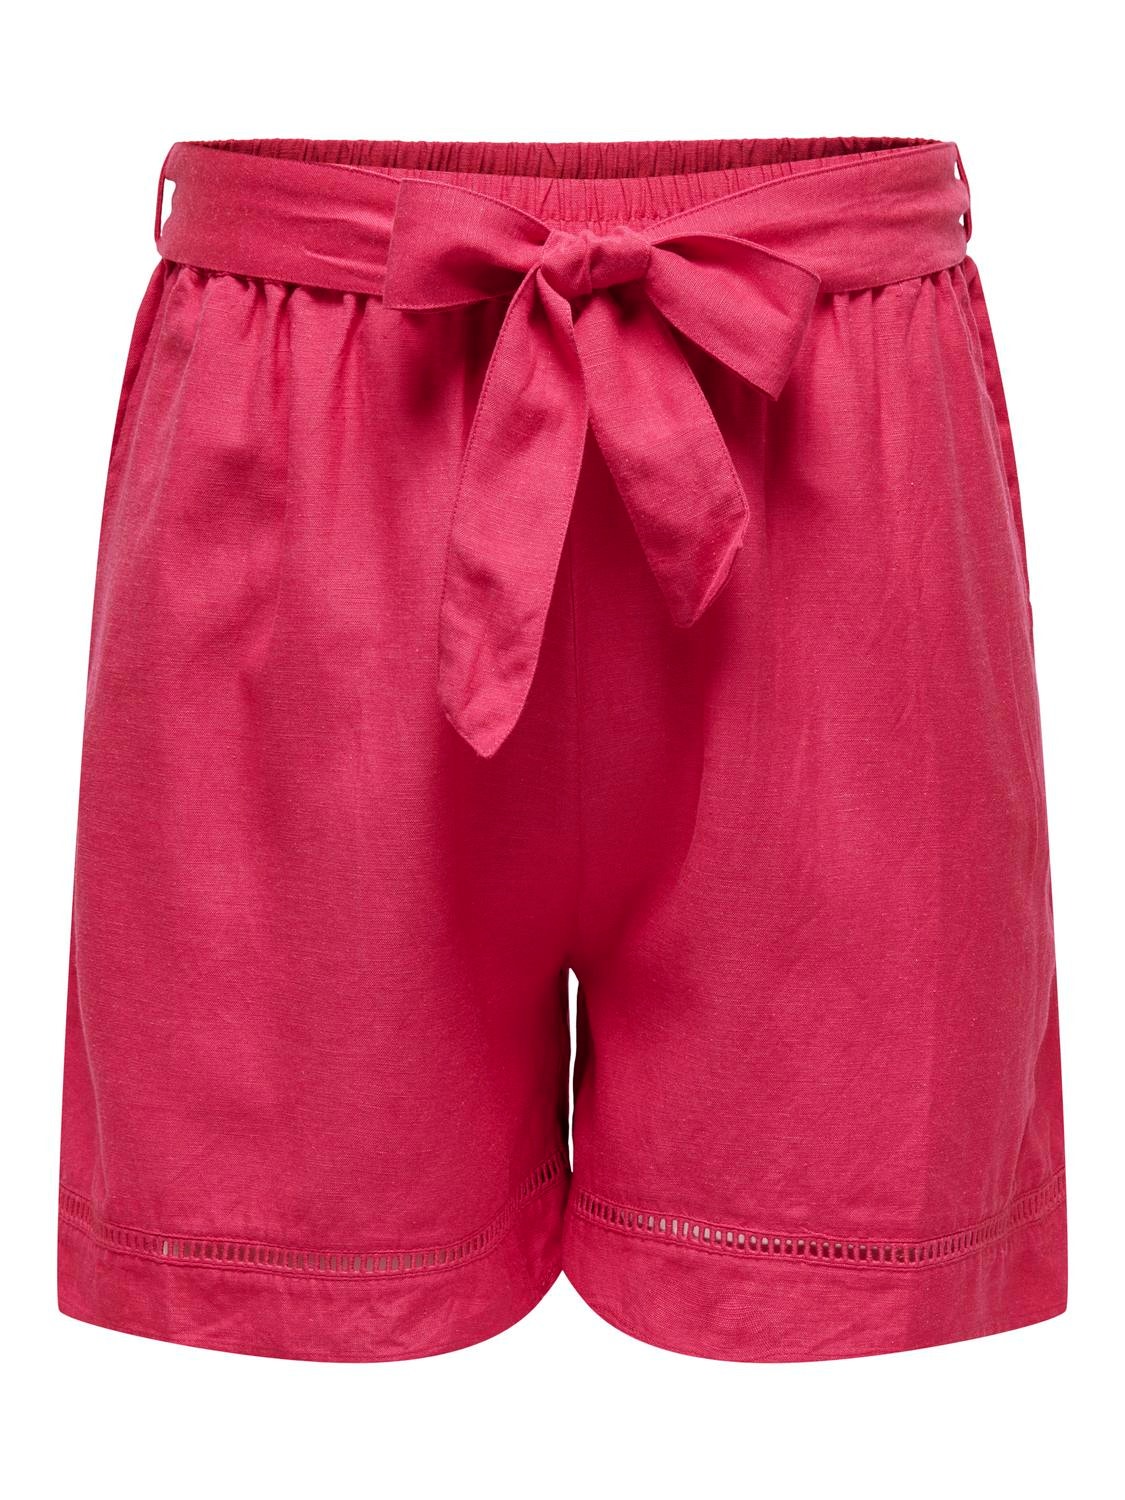 ONLY Loose fit Mid waist Shorts -Viva Magenta - 15320532